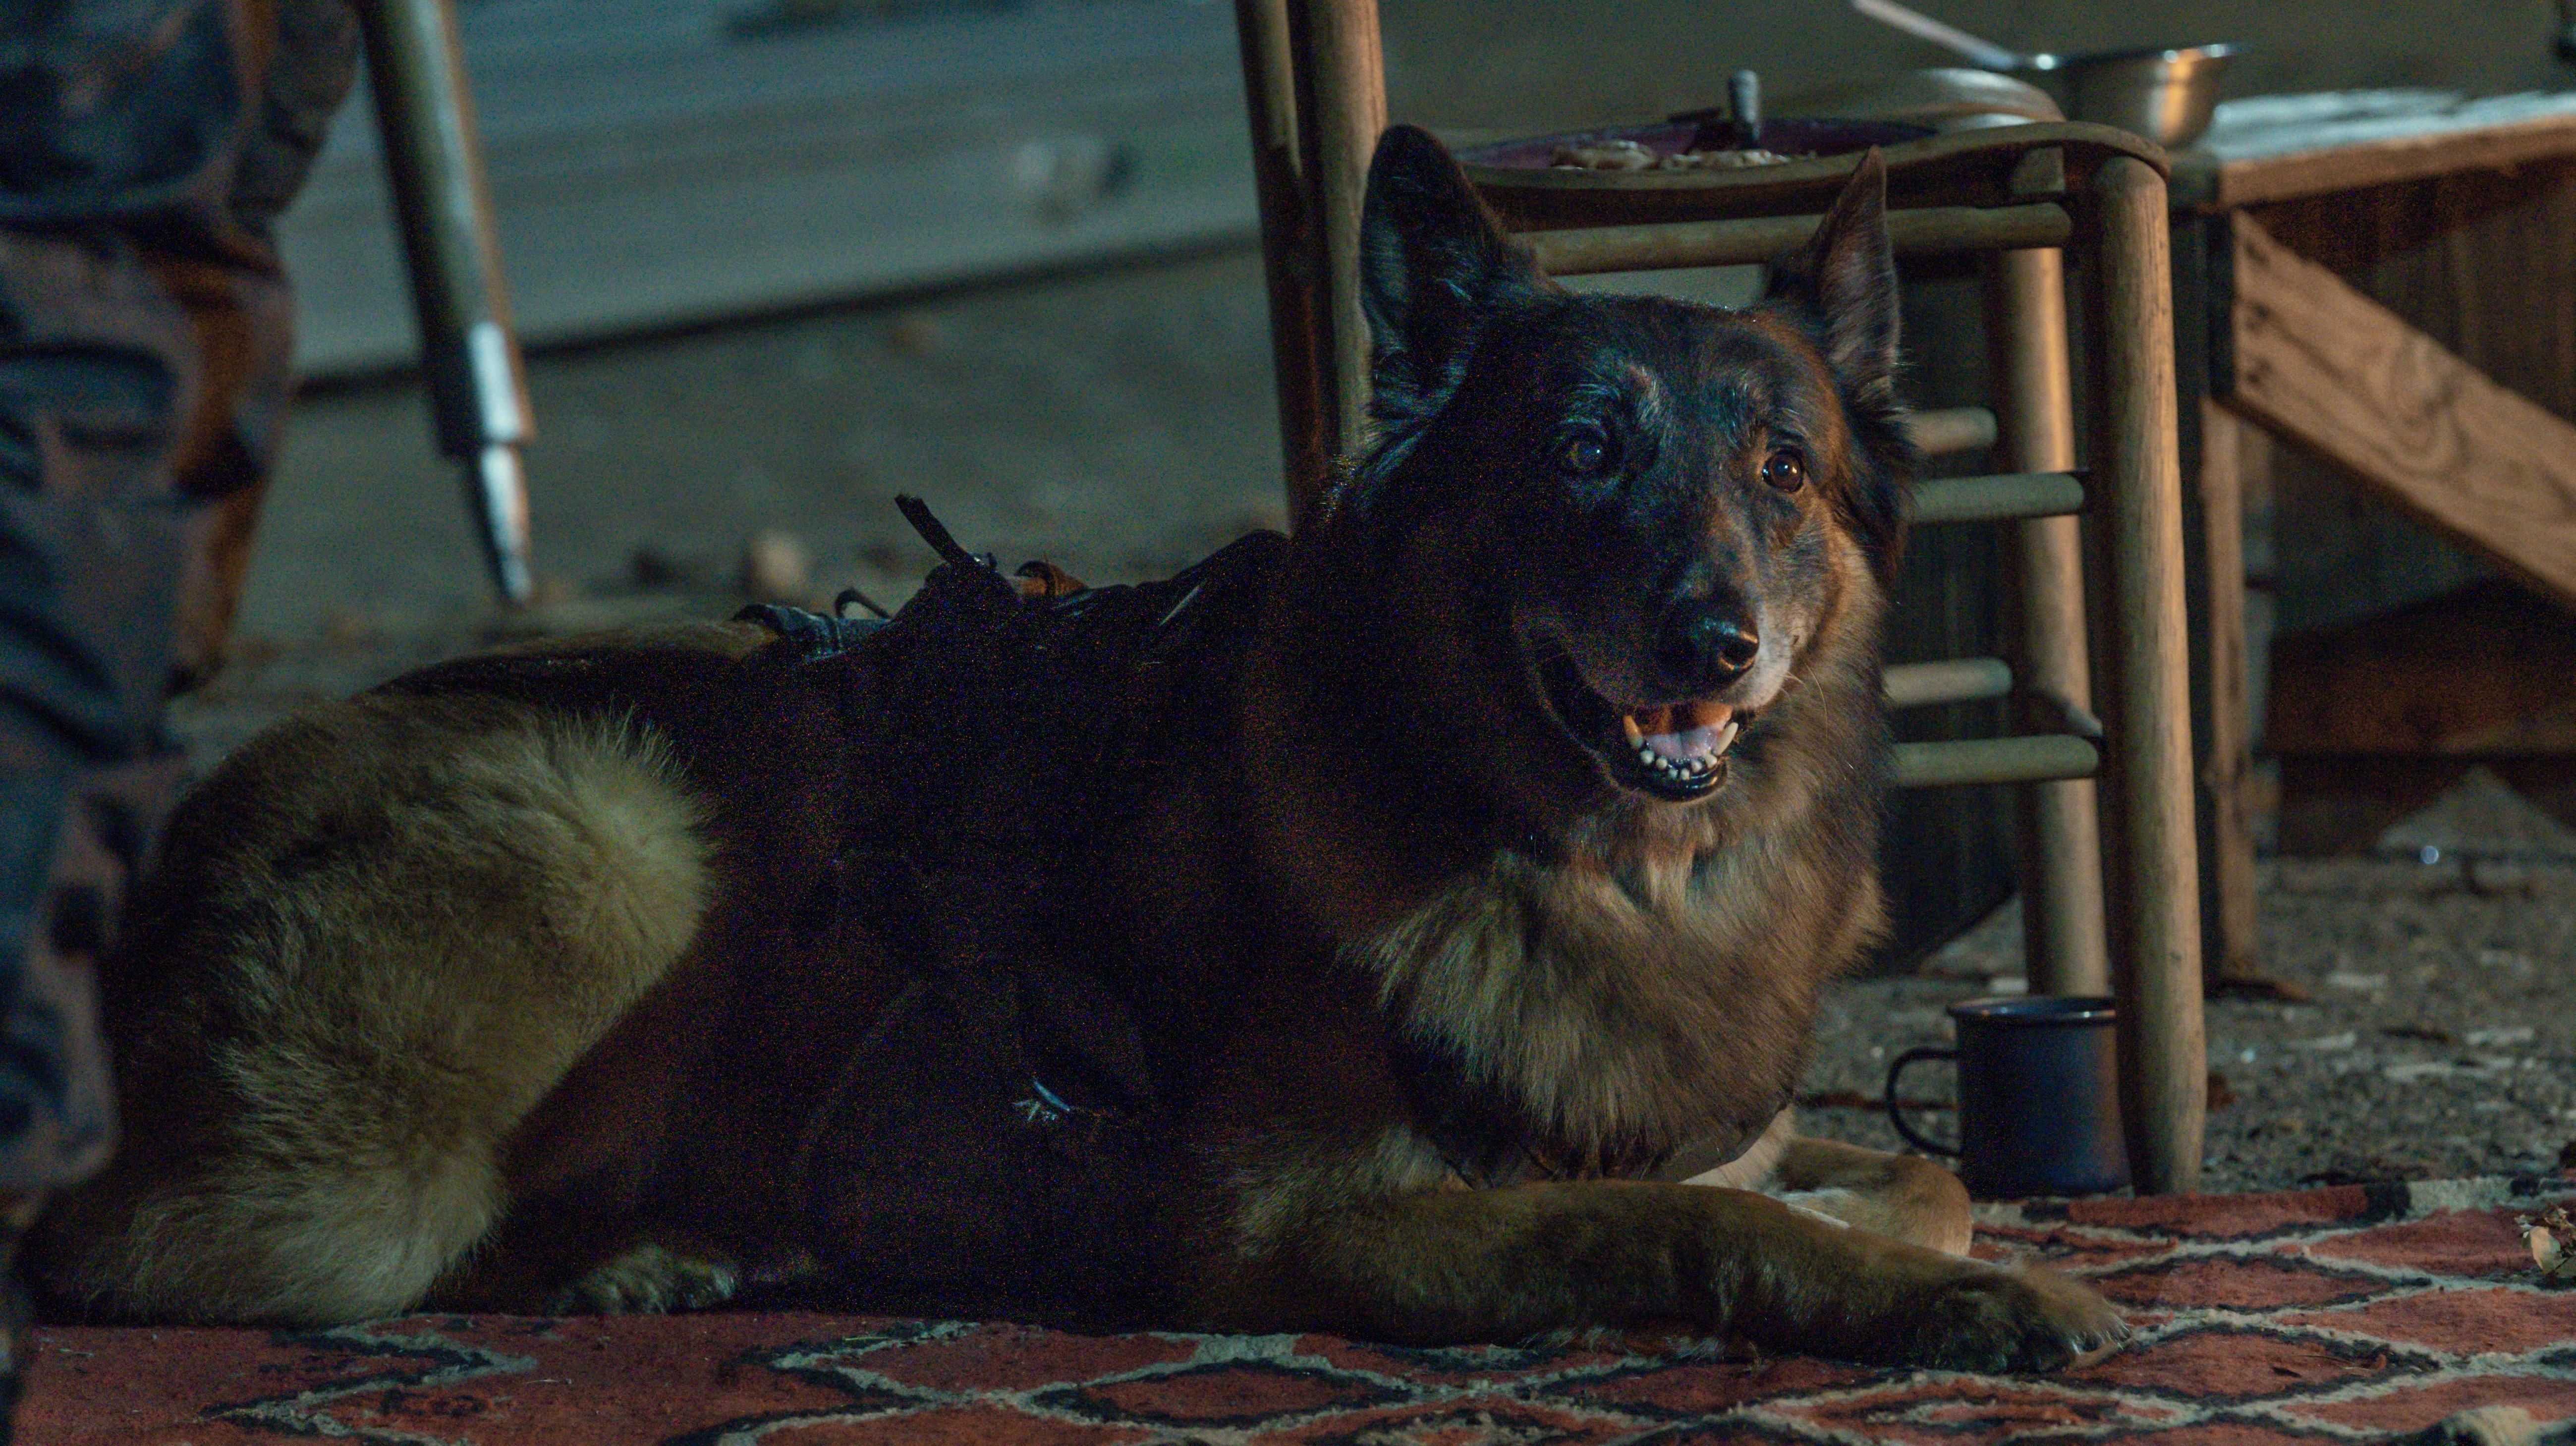 Norman Reedus, other Walking Dead stars pay tribute to good dog who played “Dog”